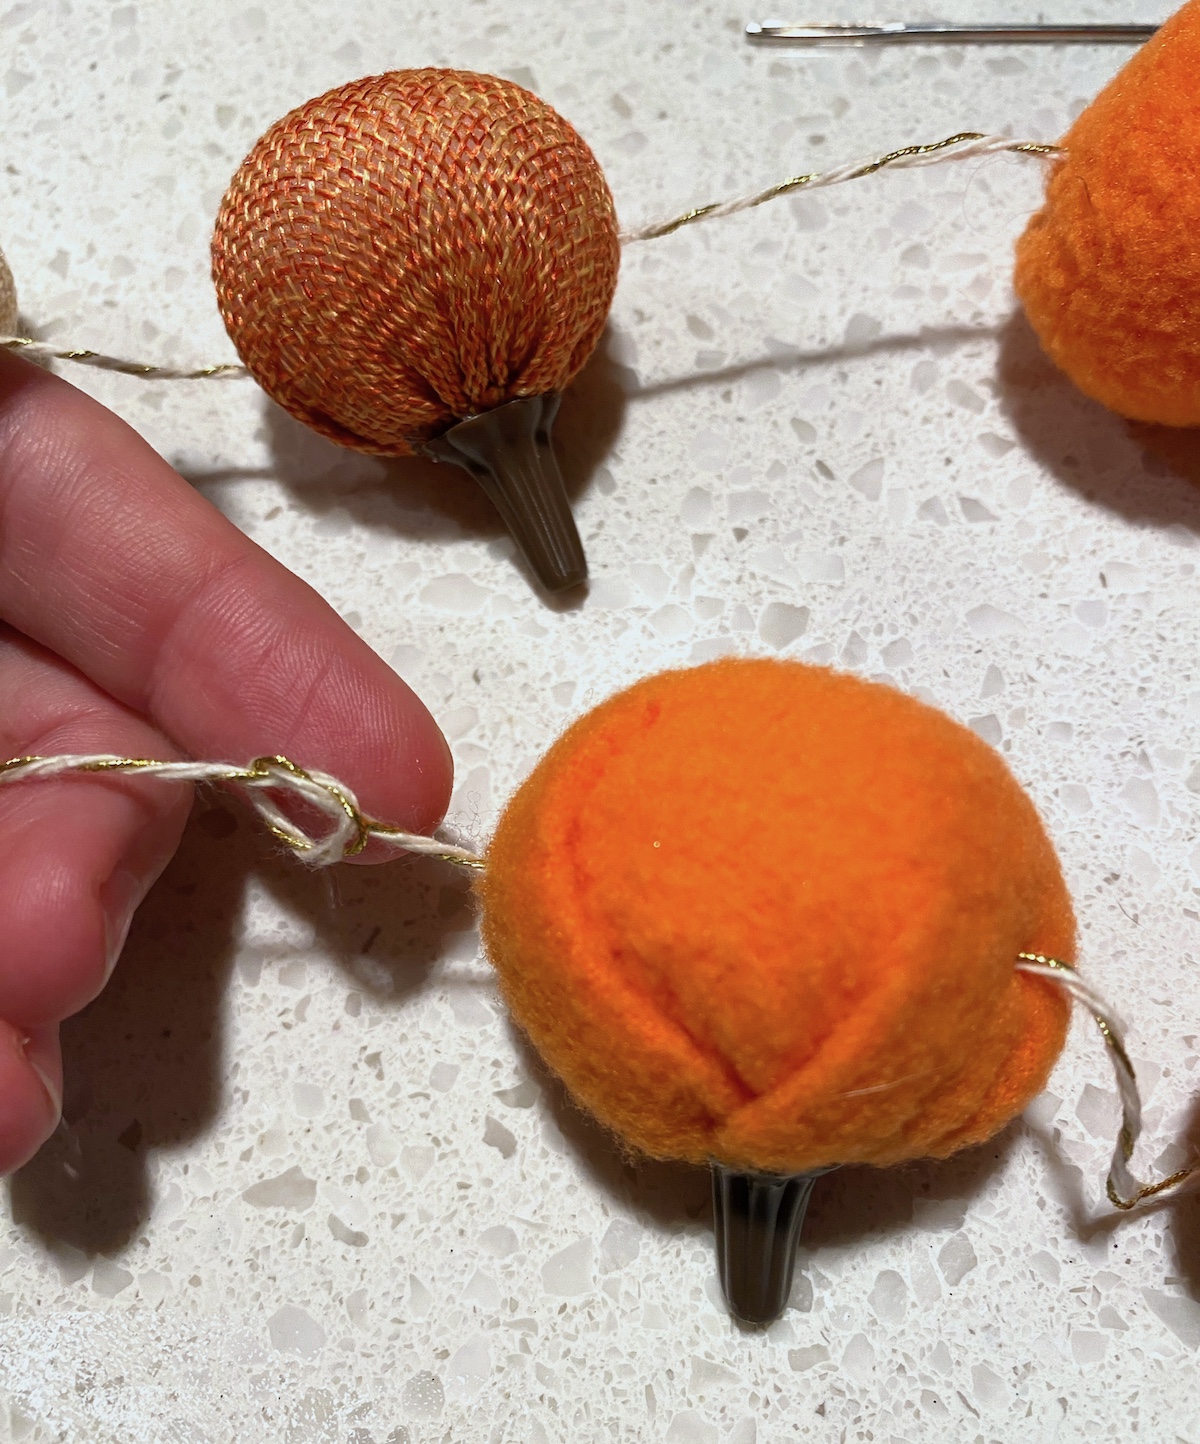 Tying a knot after each pumpkin is placed